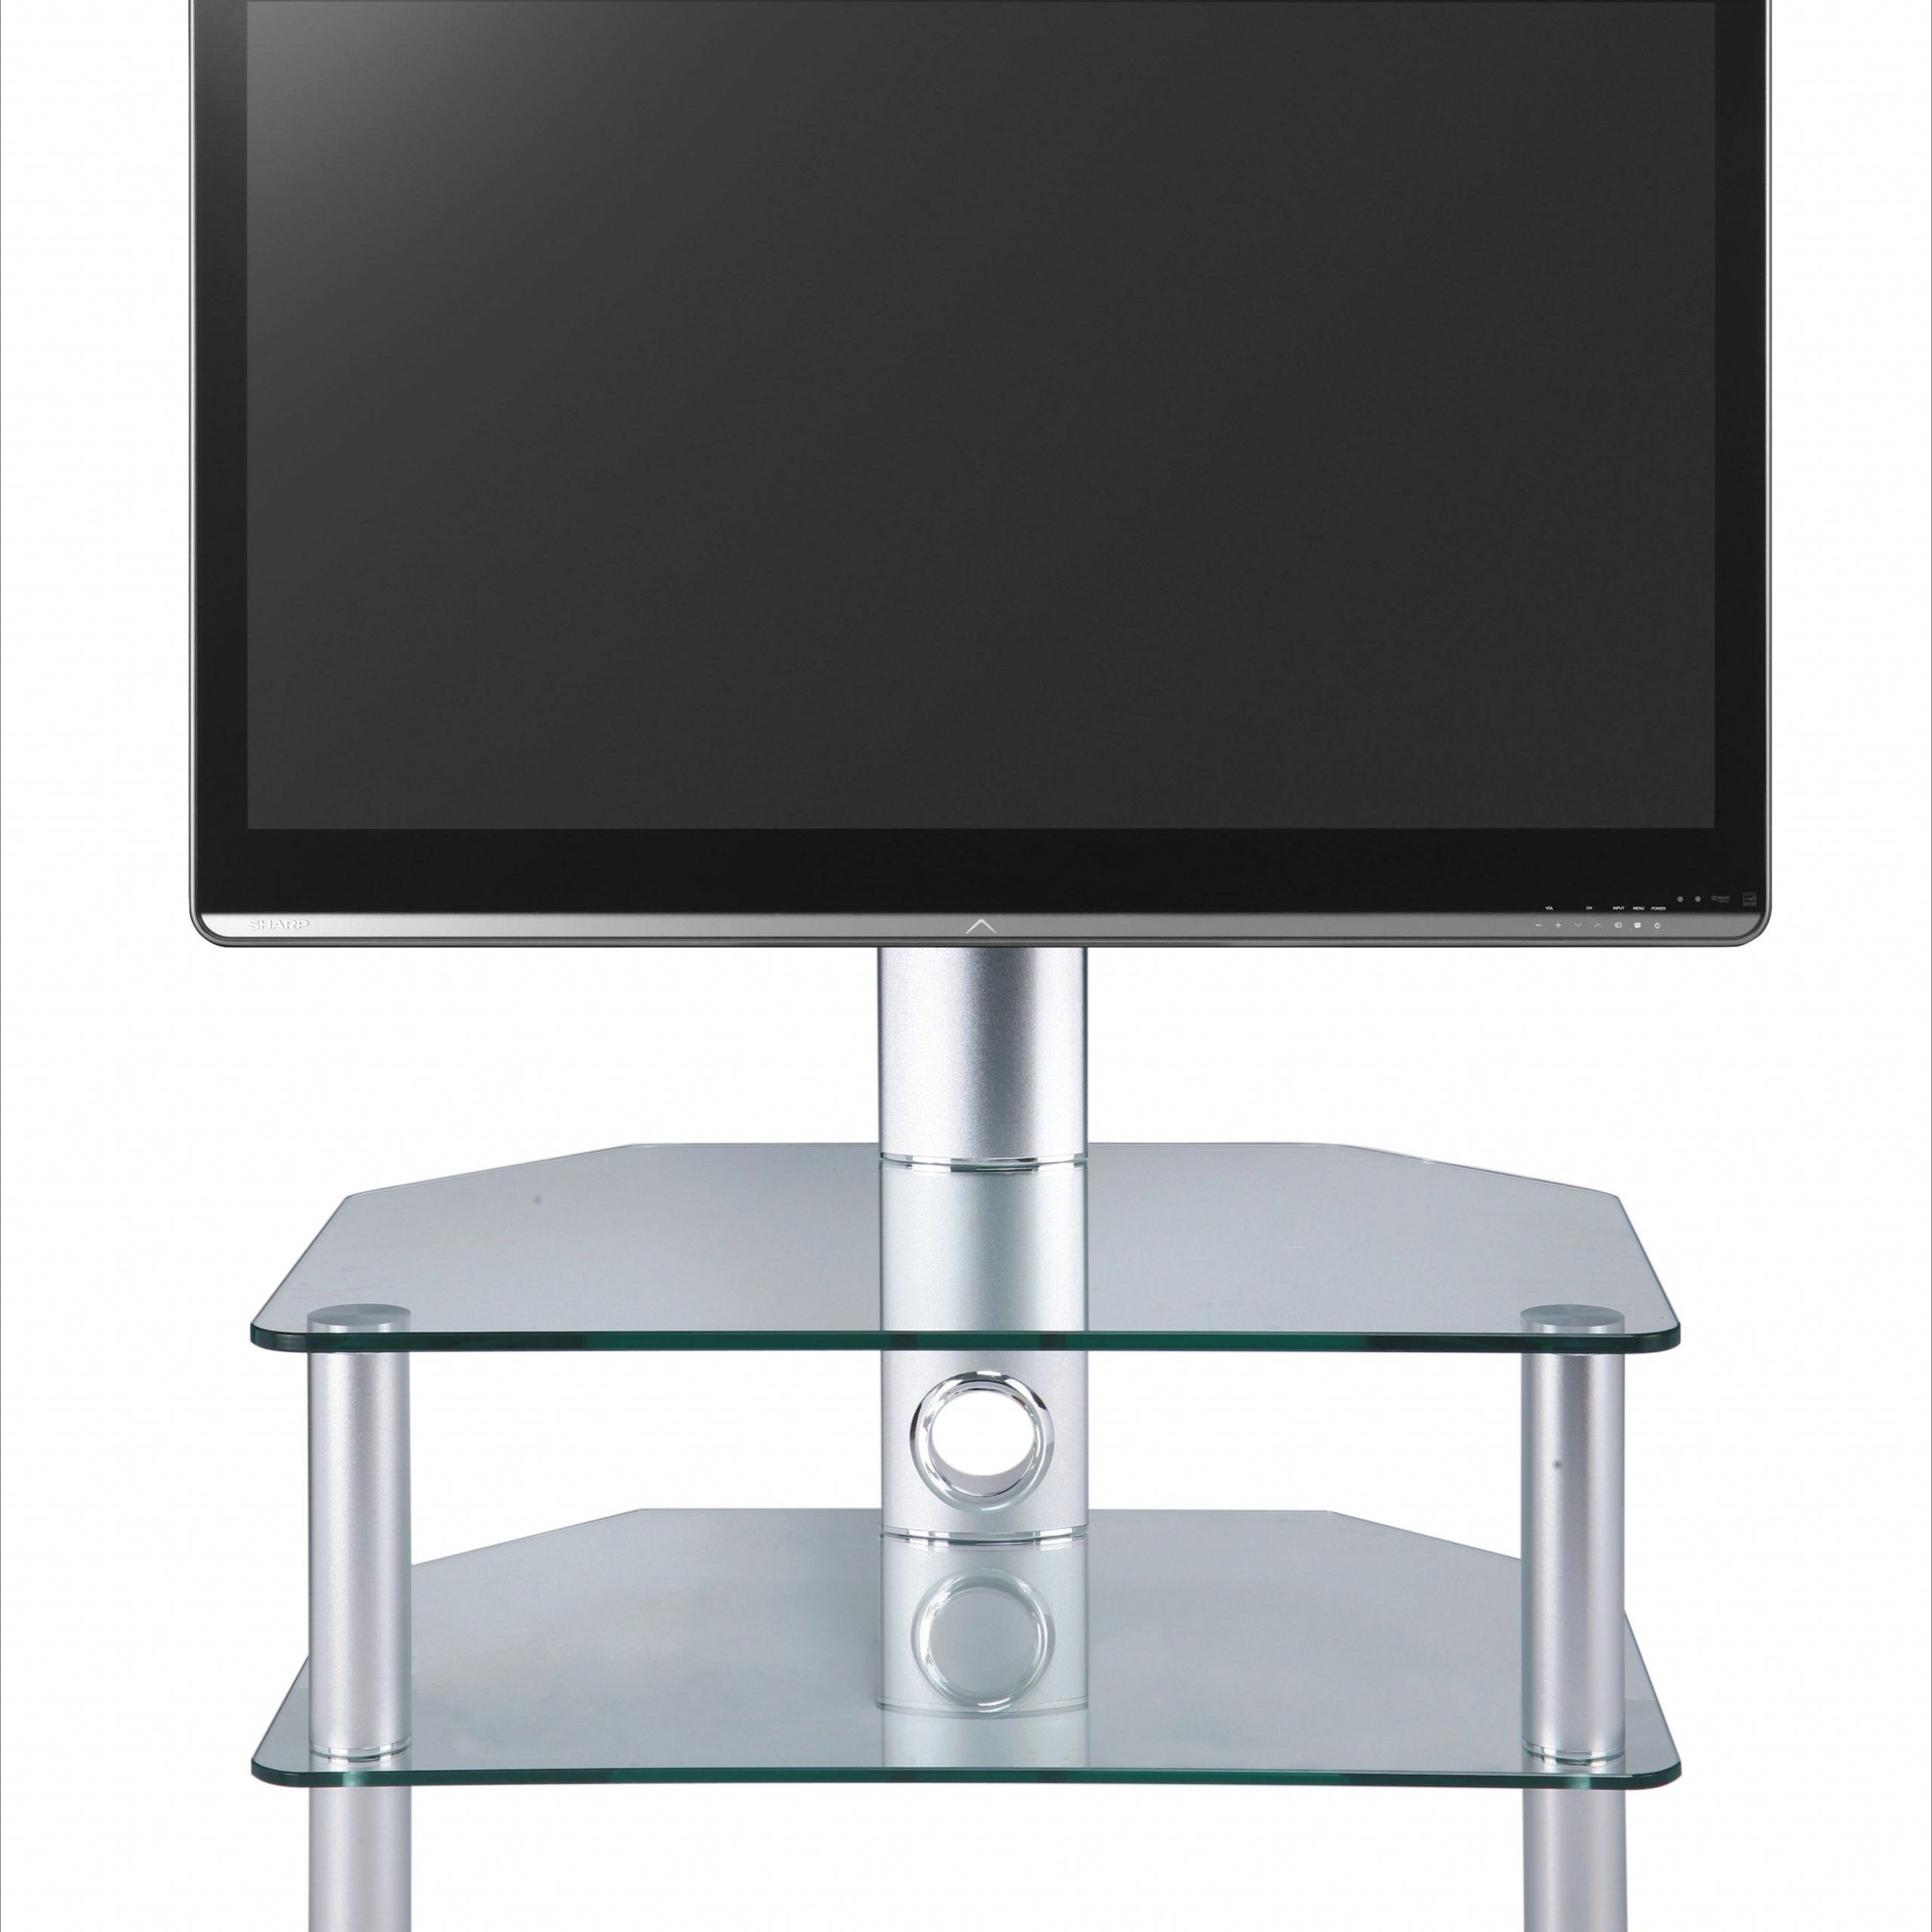 Swivel Clear Glass Cantilever Tv Stand Up To 37"stil Pertaining To Swivel Black Glass Tv Stands (Photo 12 of 15)